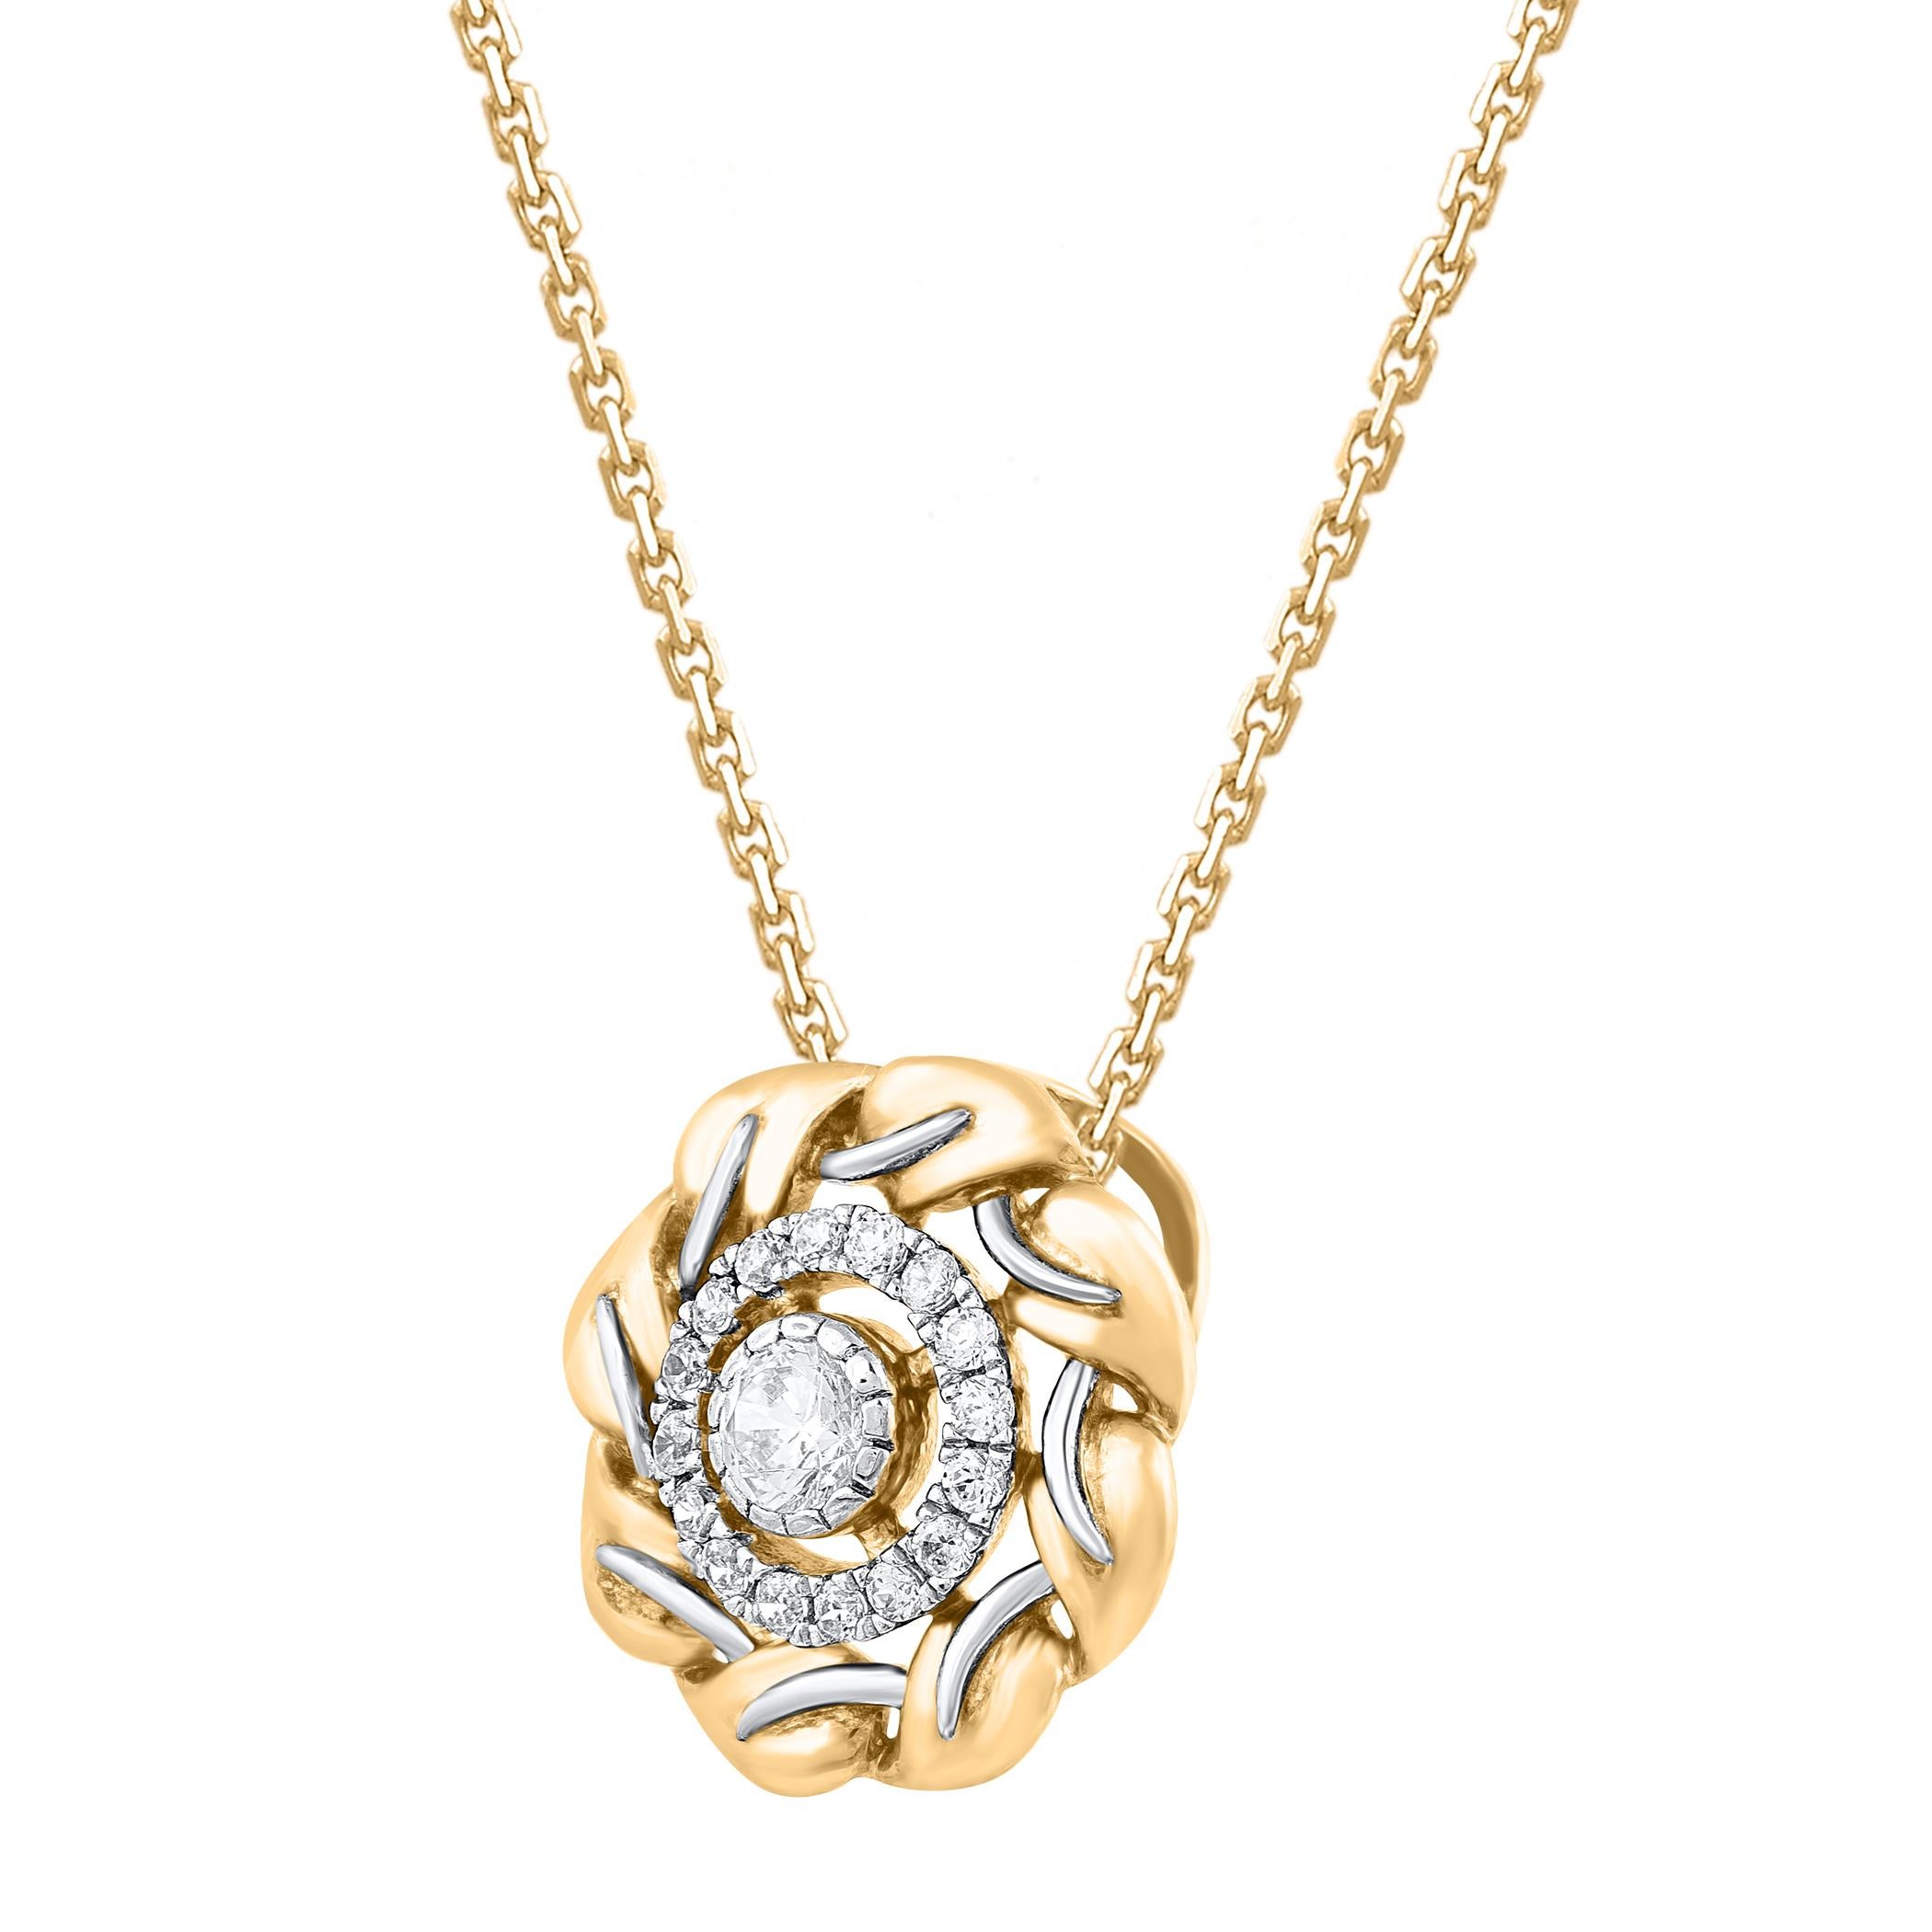 Bring charm to your look with this diamond pendant. This pendant is crafted from 14-karat yellow gold and studded with 17 brilliant white diamonds in prong & bezel setting. H-I color I-2 clarity and a high polish finish complete the brilliant